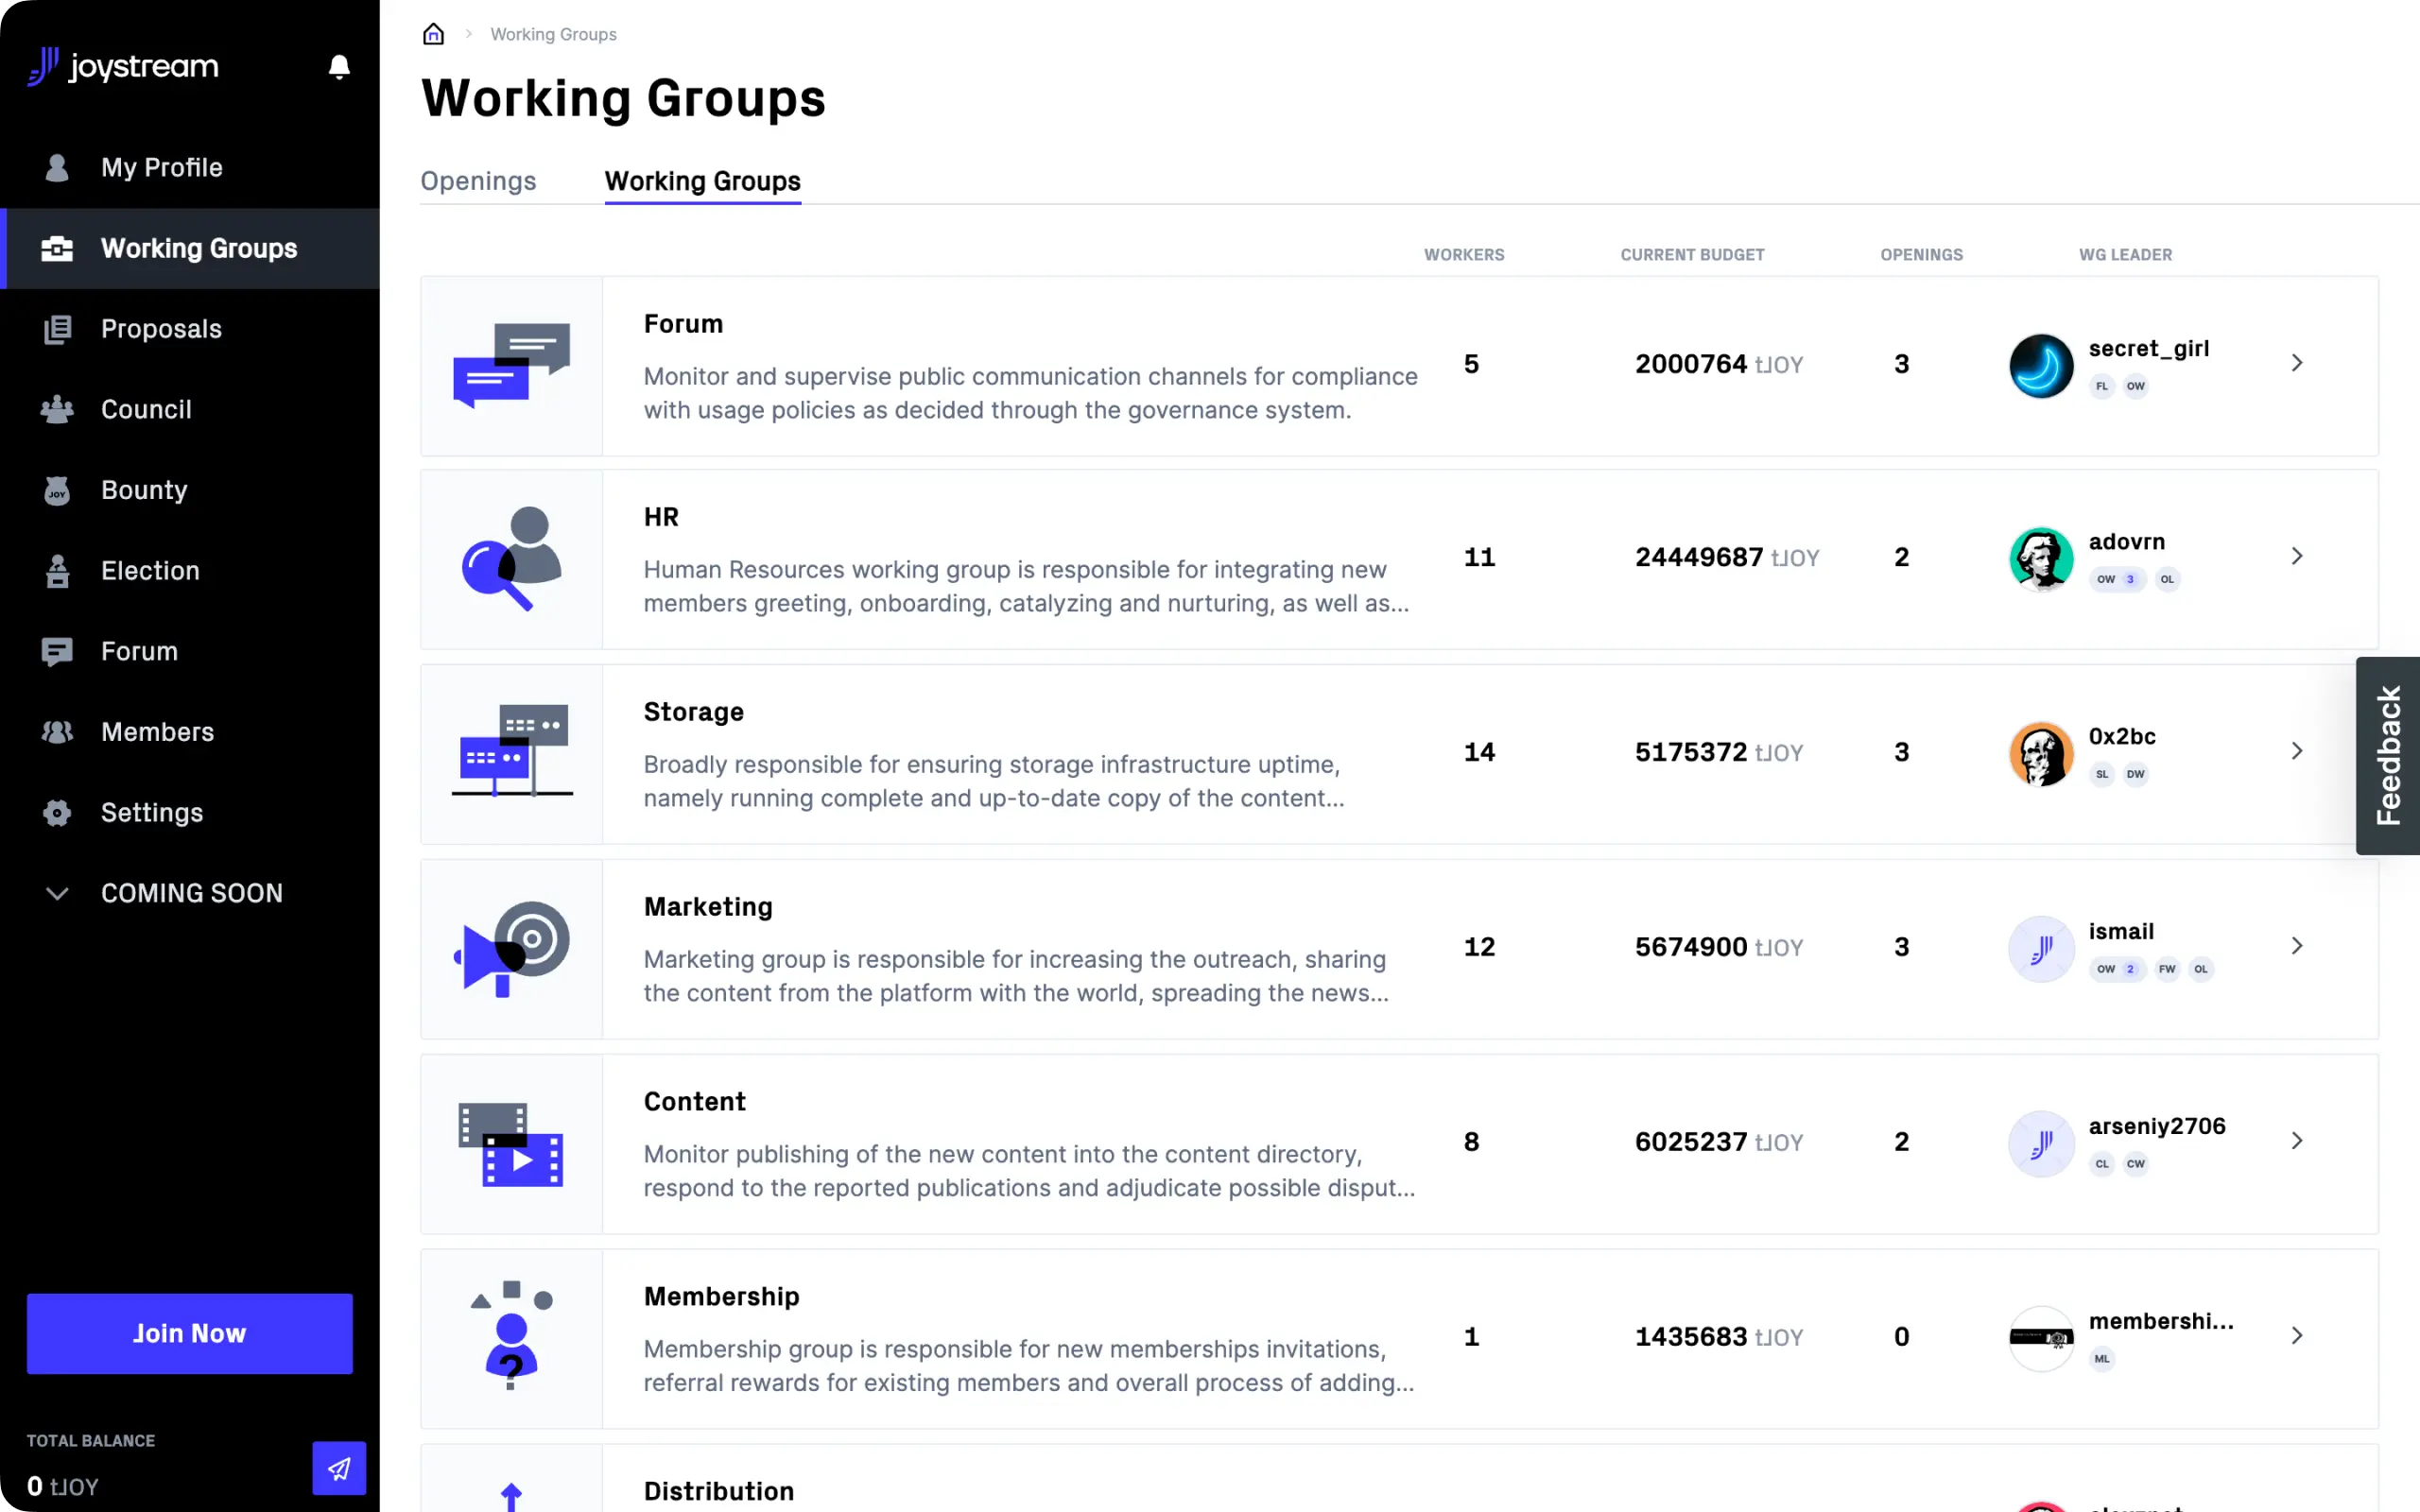 joystream governance product, open on tab working groups, outlining the currently available groups